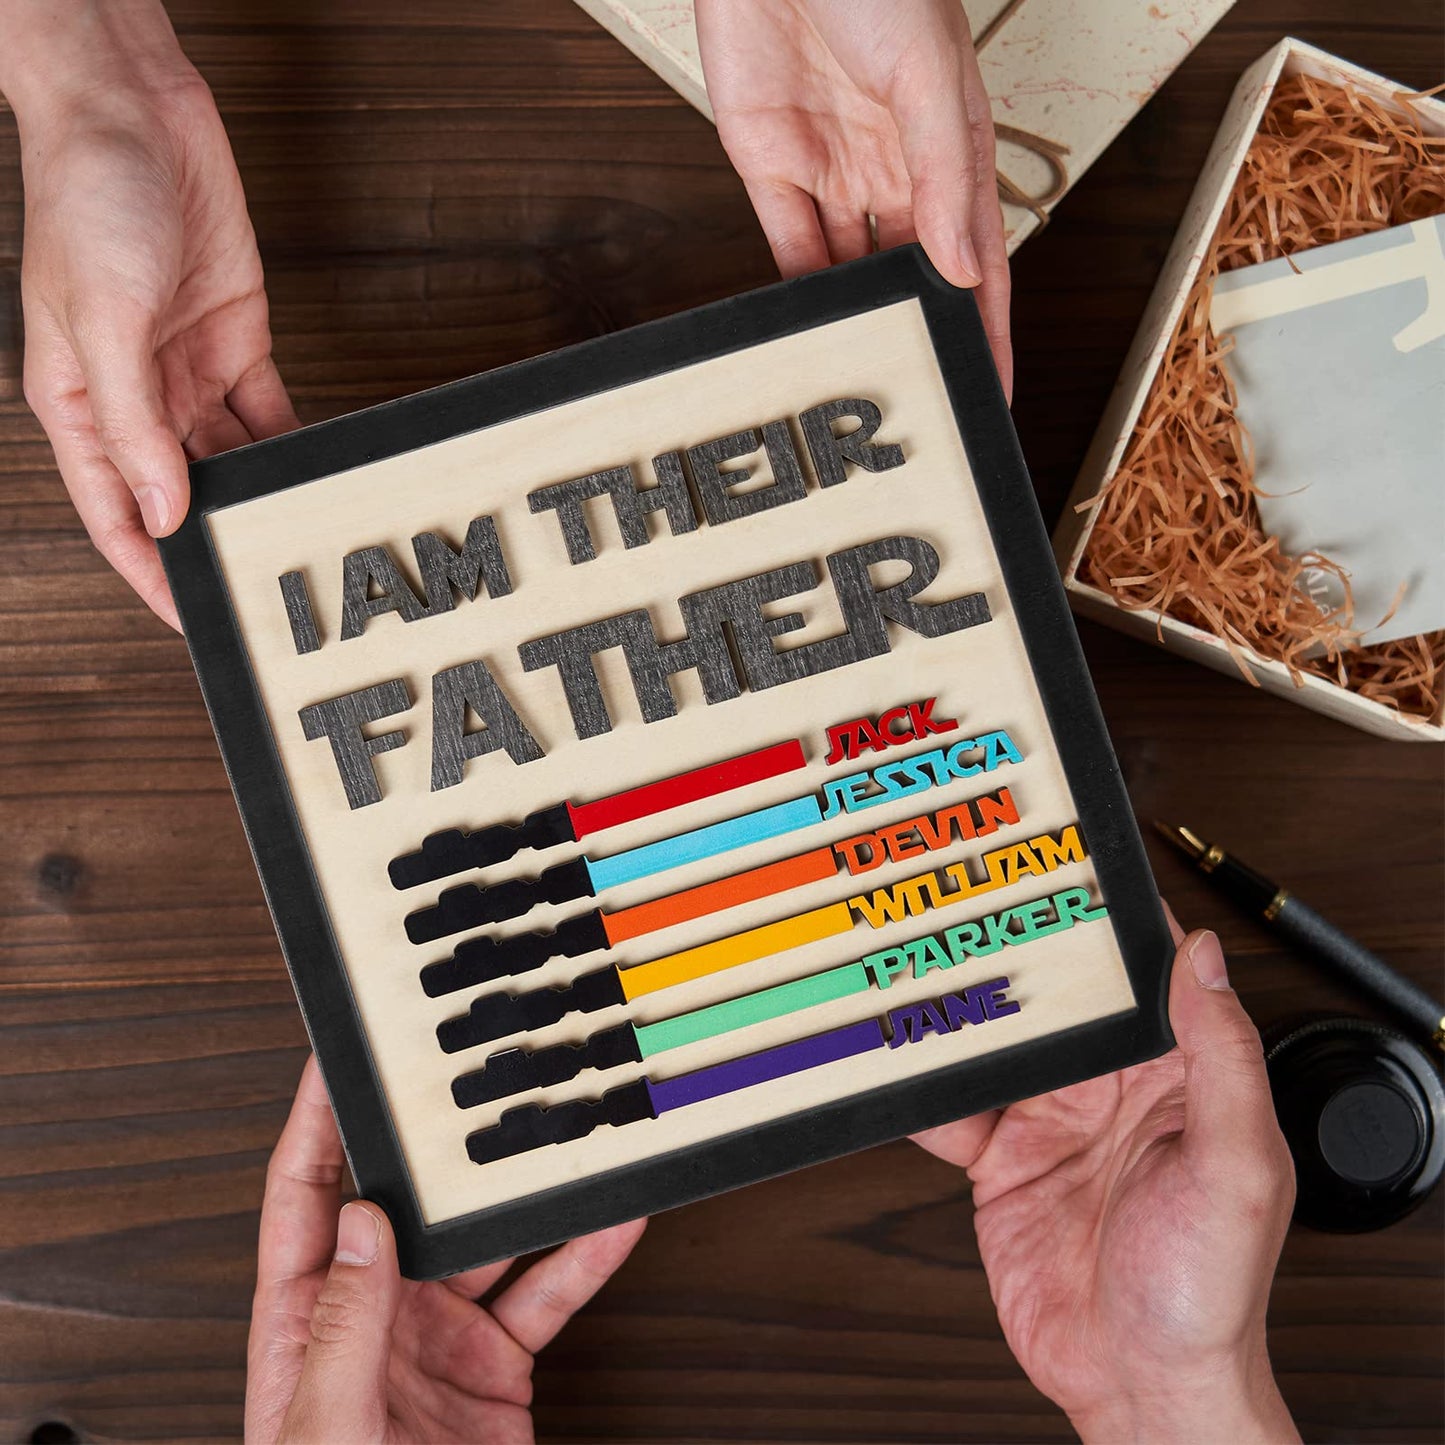 I Am Their Father Engraved Wooden Sign-Father‘s Day Gift